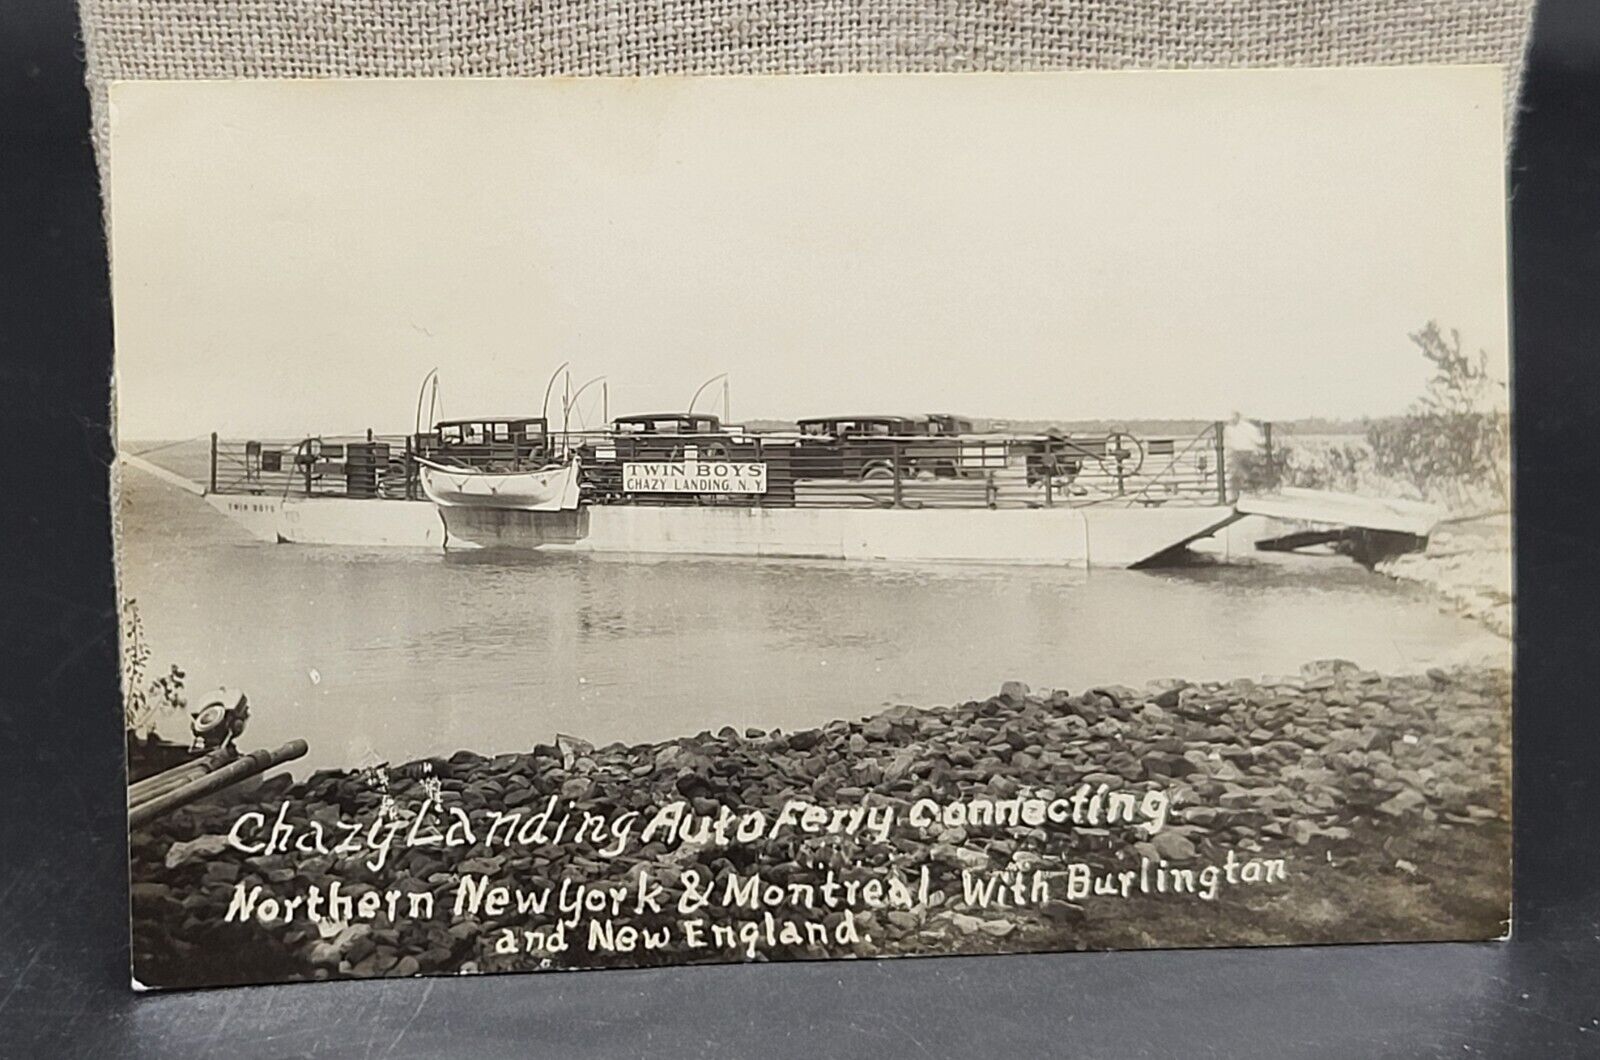 Antique real photo postcard of Chazy Landing auto Ferry, New York, posted